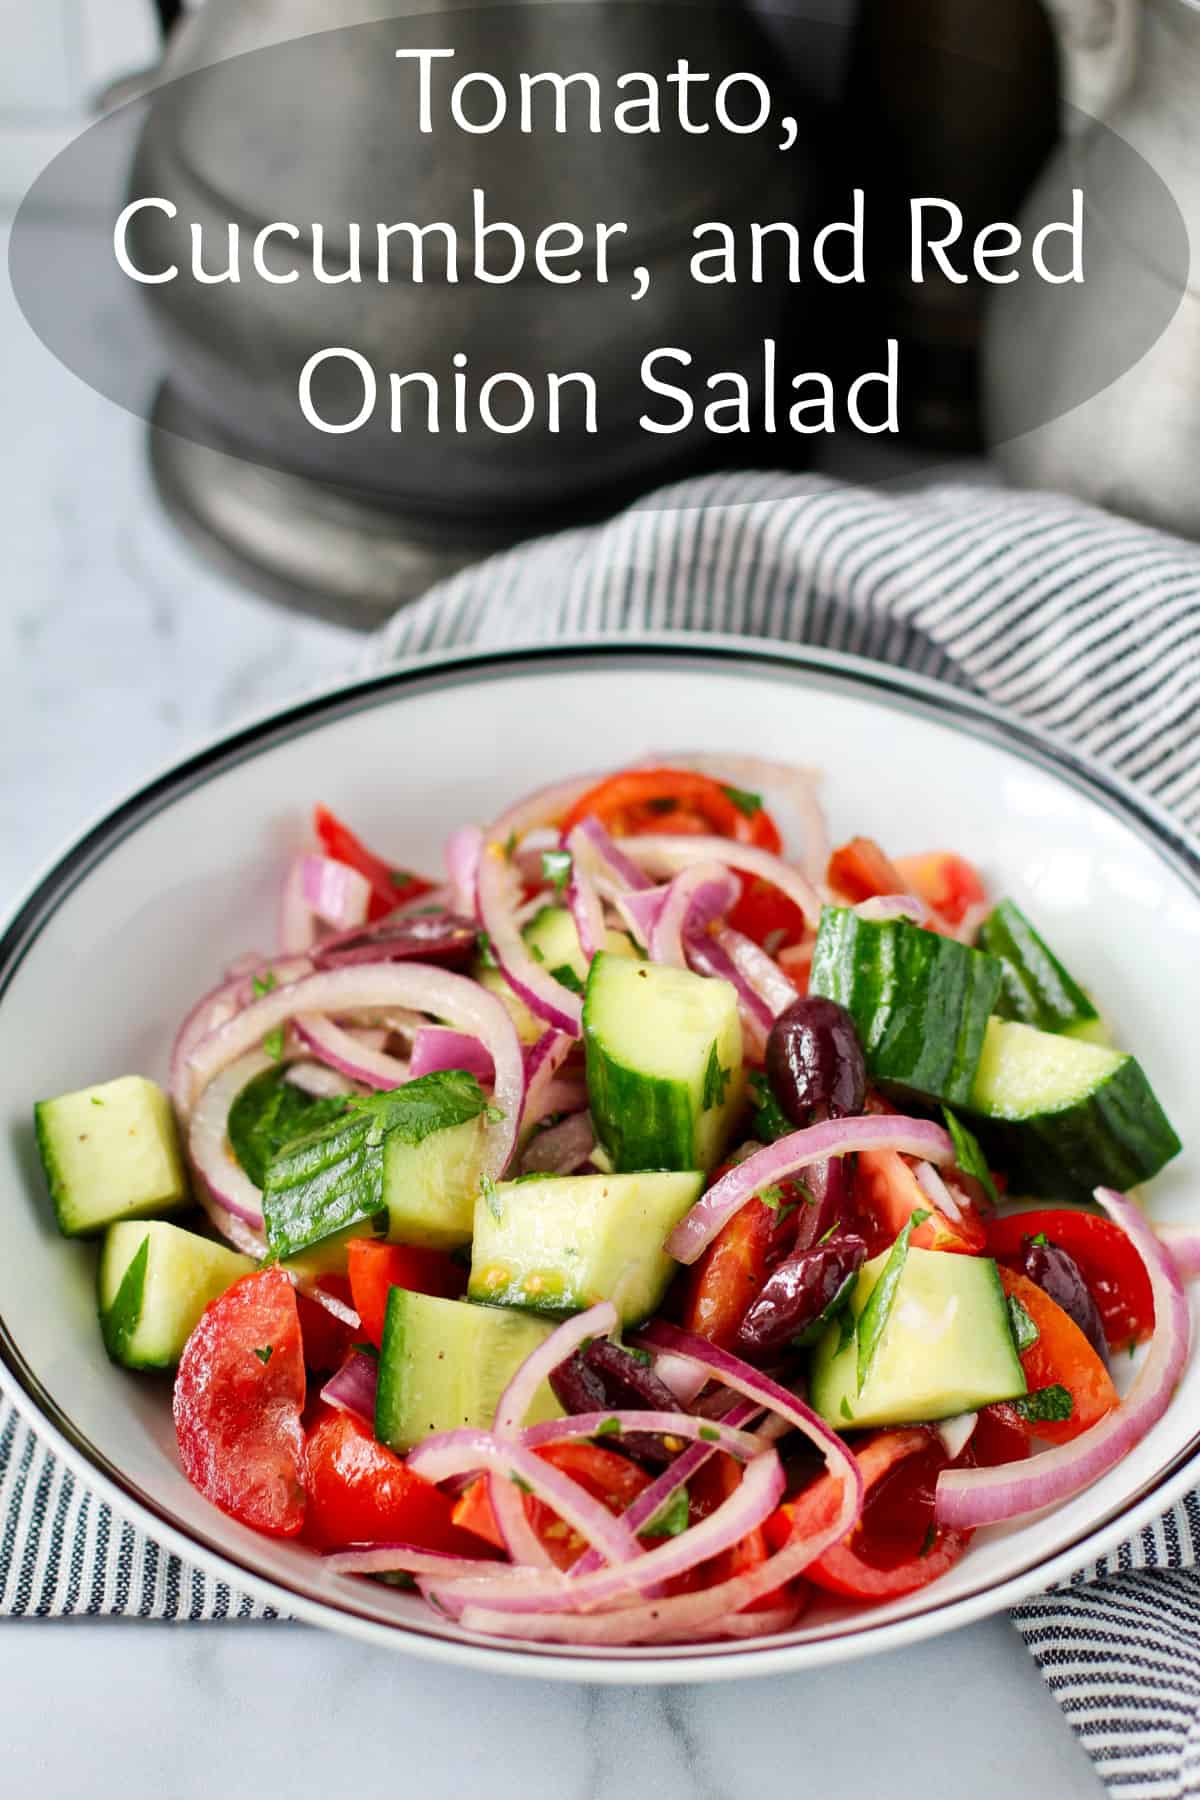 Tomato, Cucumber, and Red Onion Salad with Latholemono Dressing in a dish.